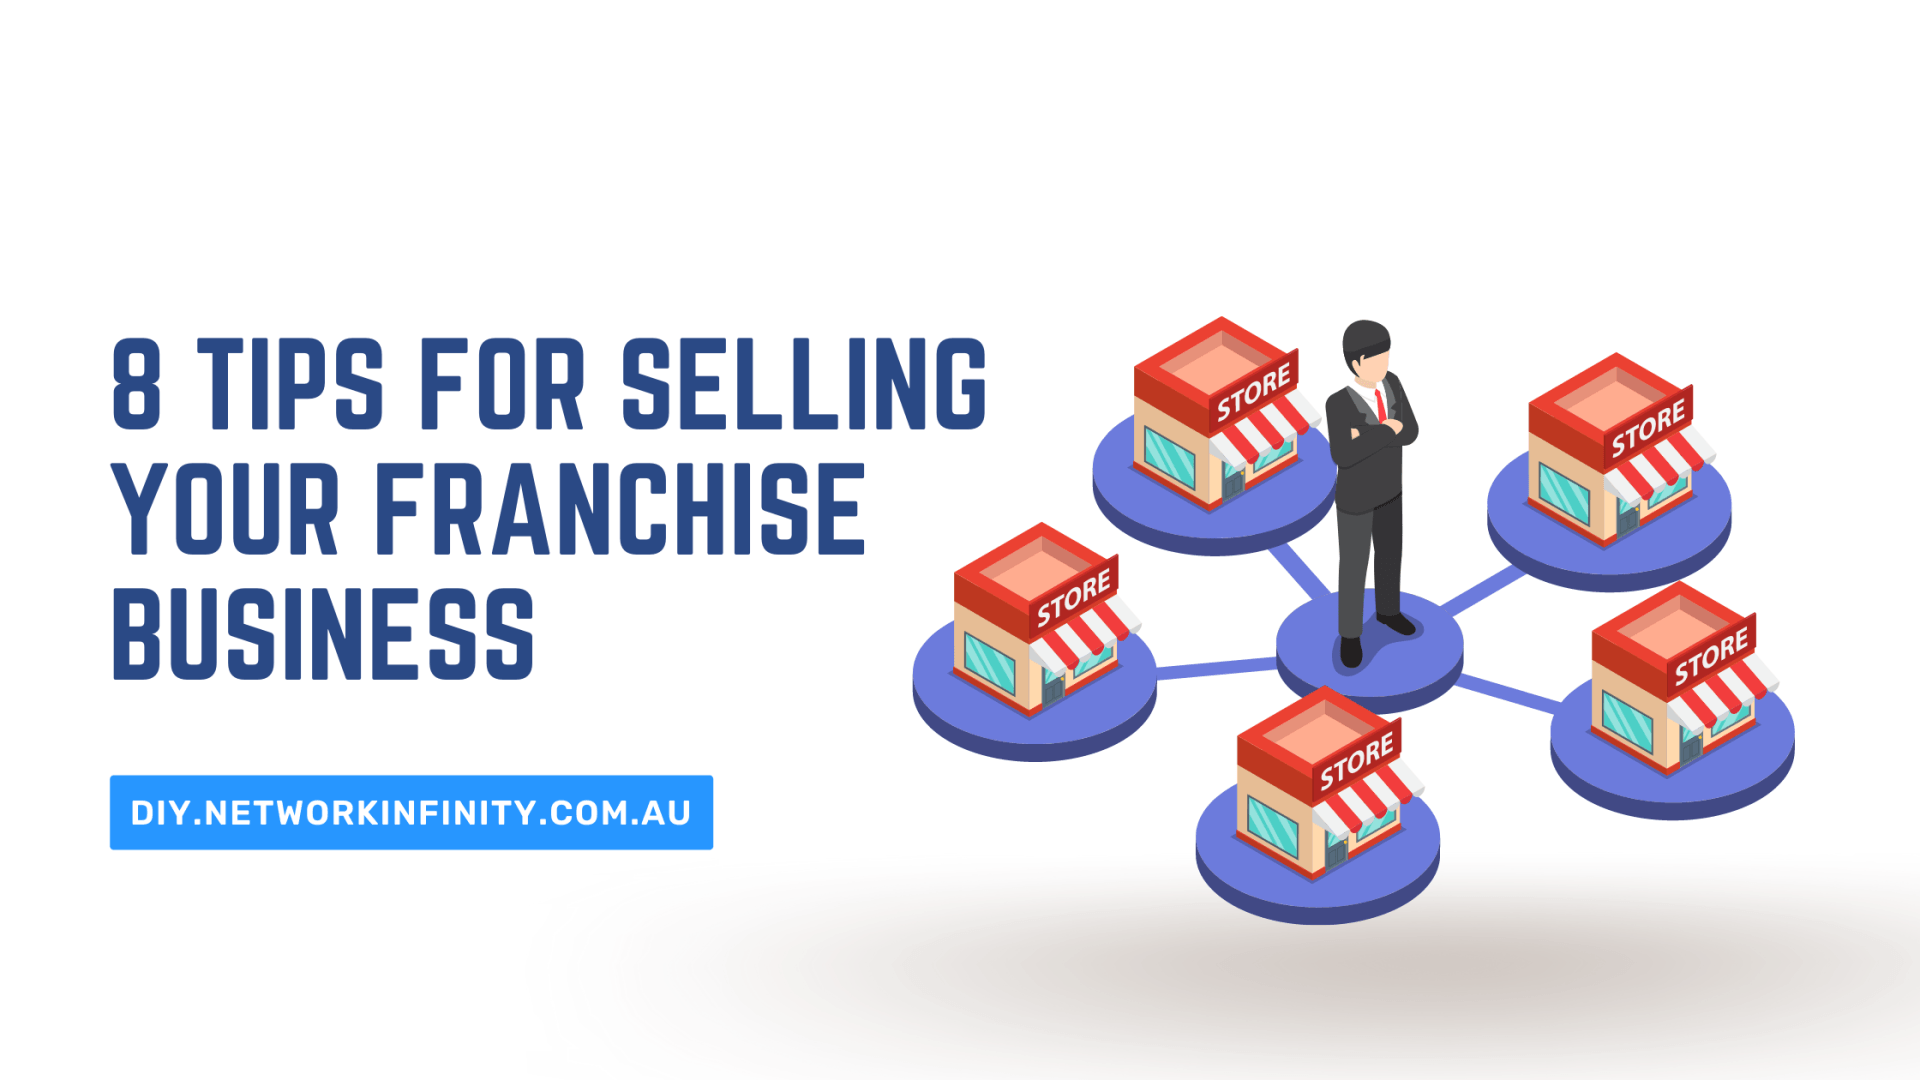 How To Sell Your Franchise Business